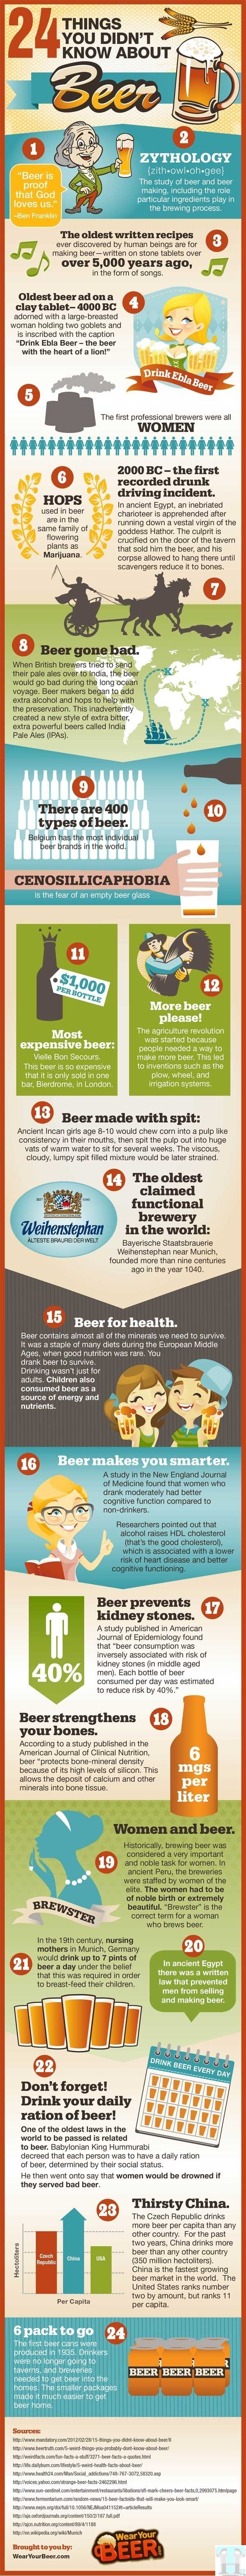 24 Things to know about Beer